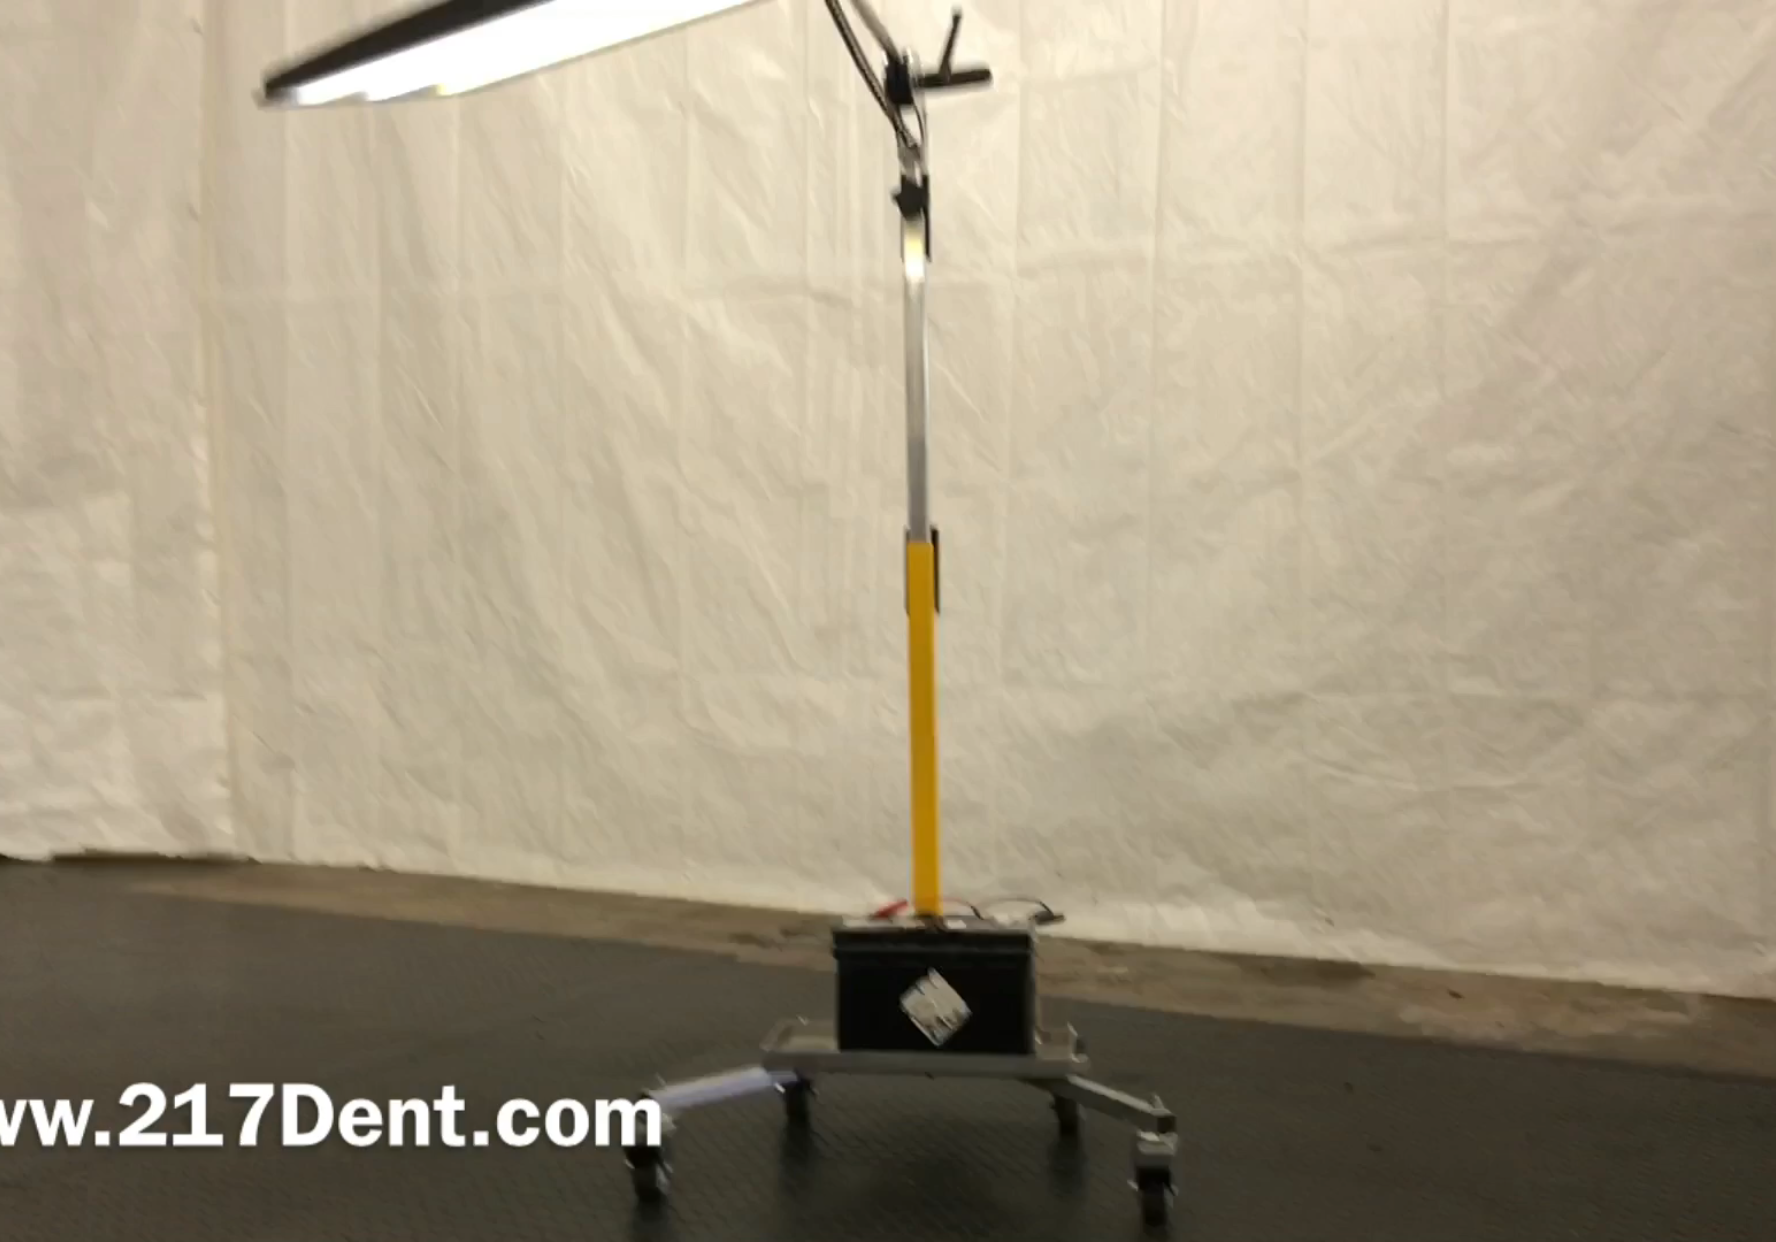 Pro Pdr Solutions Light, paintless dent removal, 36" Chubby Springfield, IL. http://217dent.com